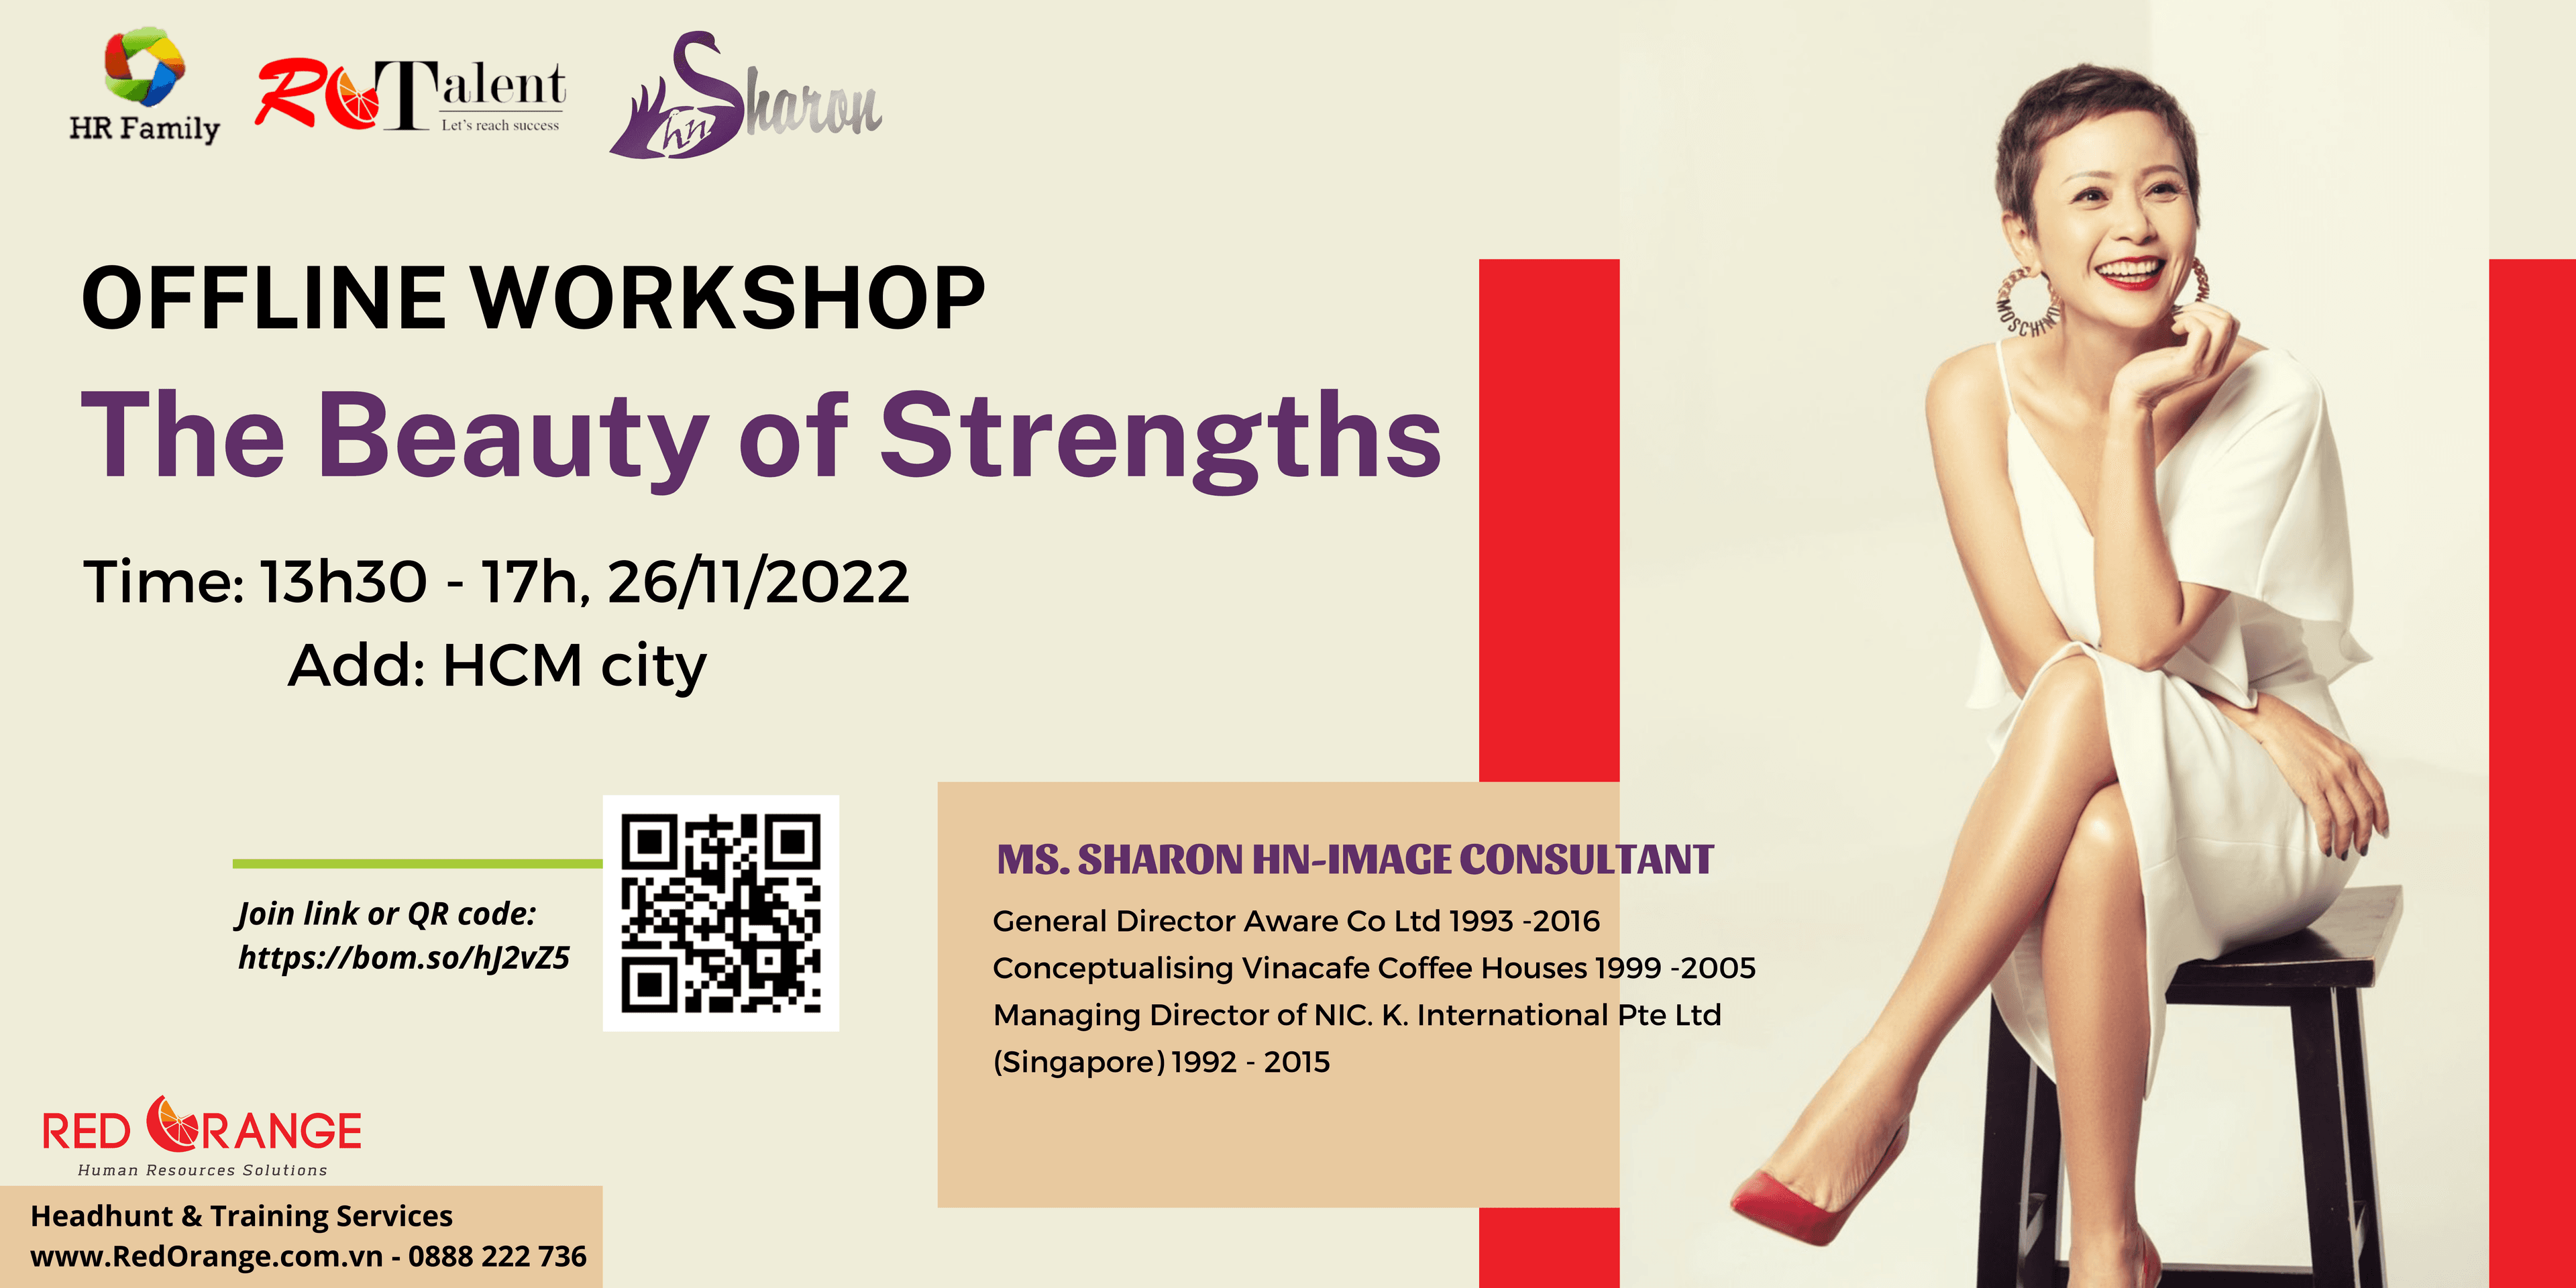 Offline Workshop 26/11: The Beauty of Strengths - From Red Orange - HR Family 